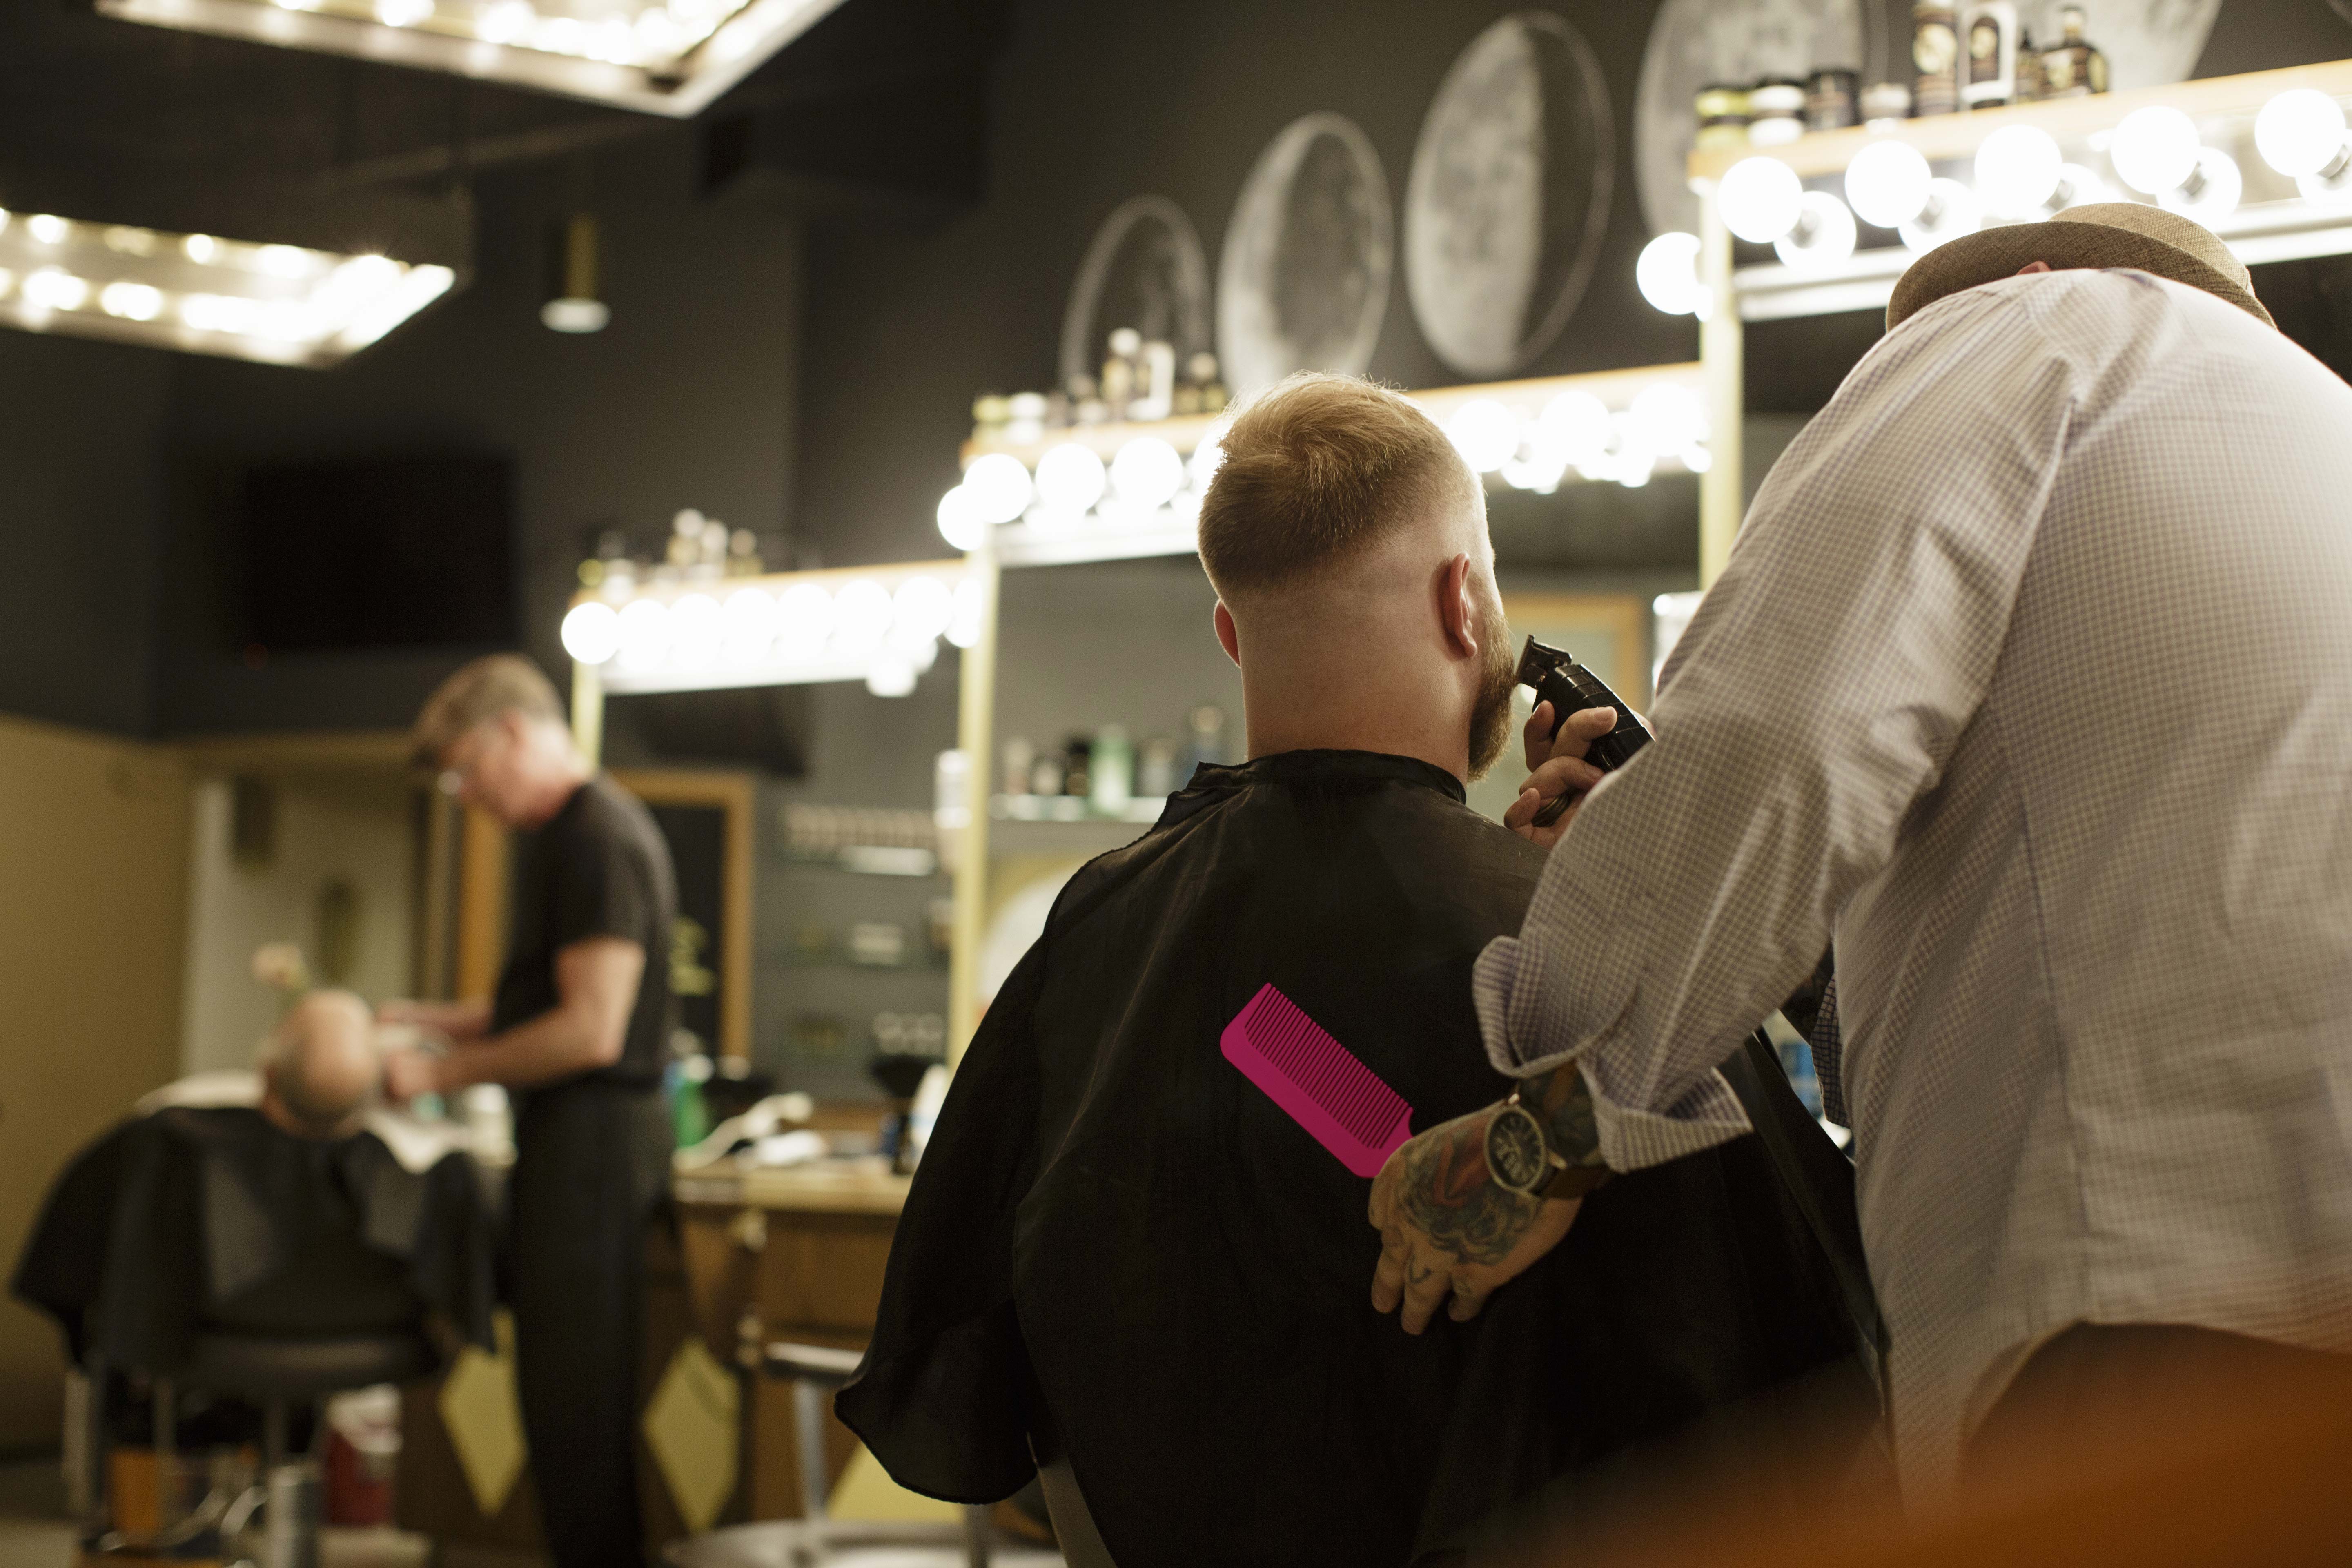 An example of a self-employed career: A barber cutting a young male’s hair.